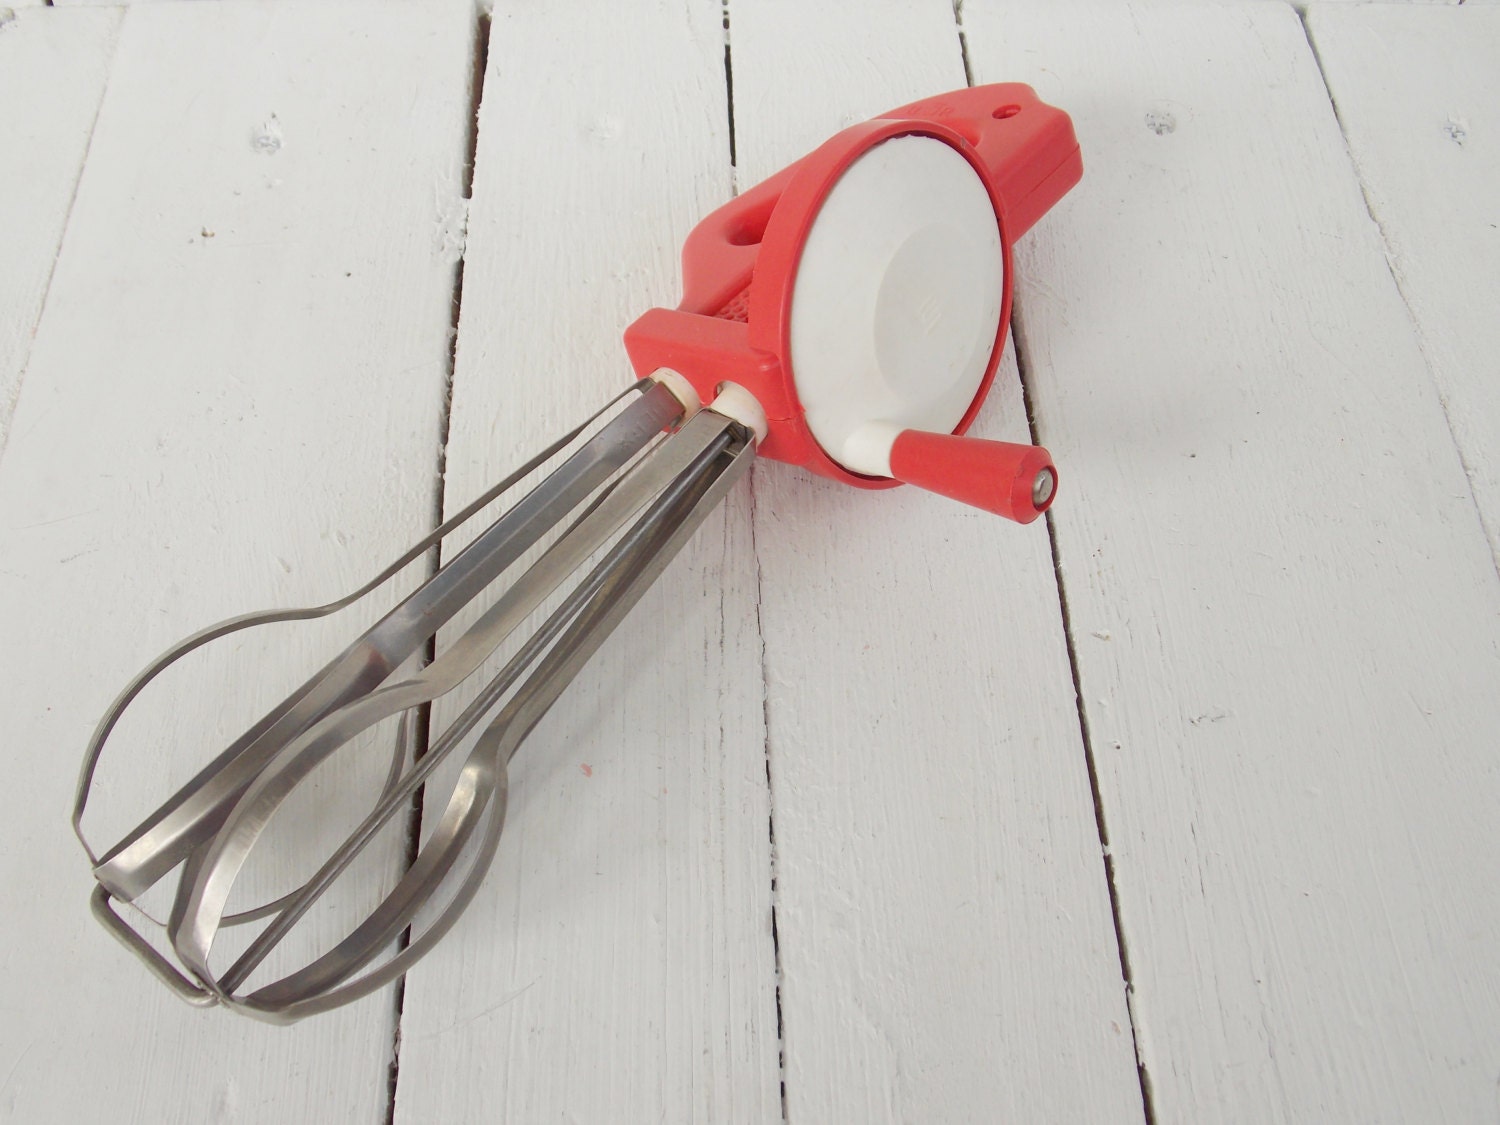 On Sale Vintage Hand Whisk Gloria DDR GERMANY Egg Beater Hand 